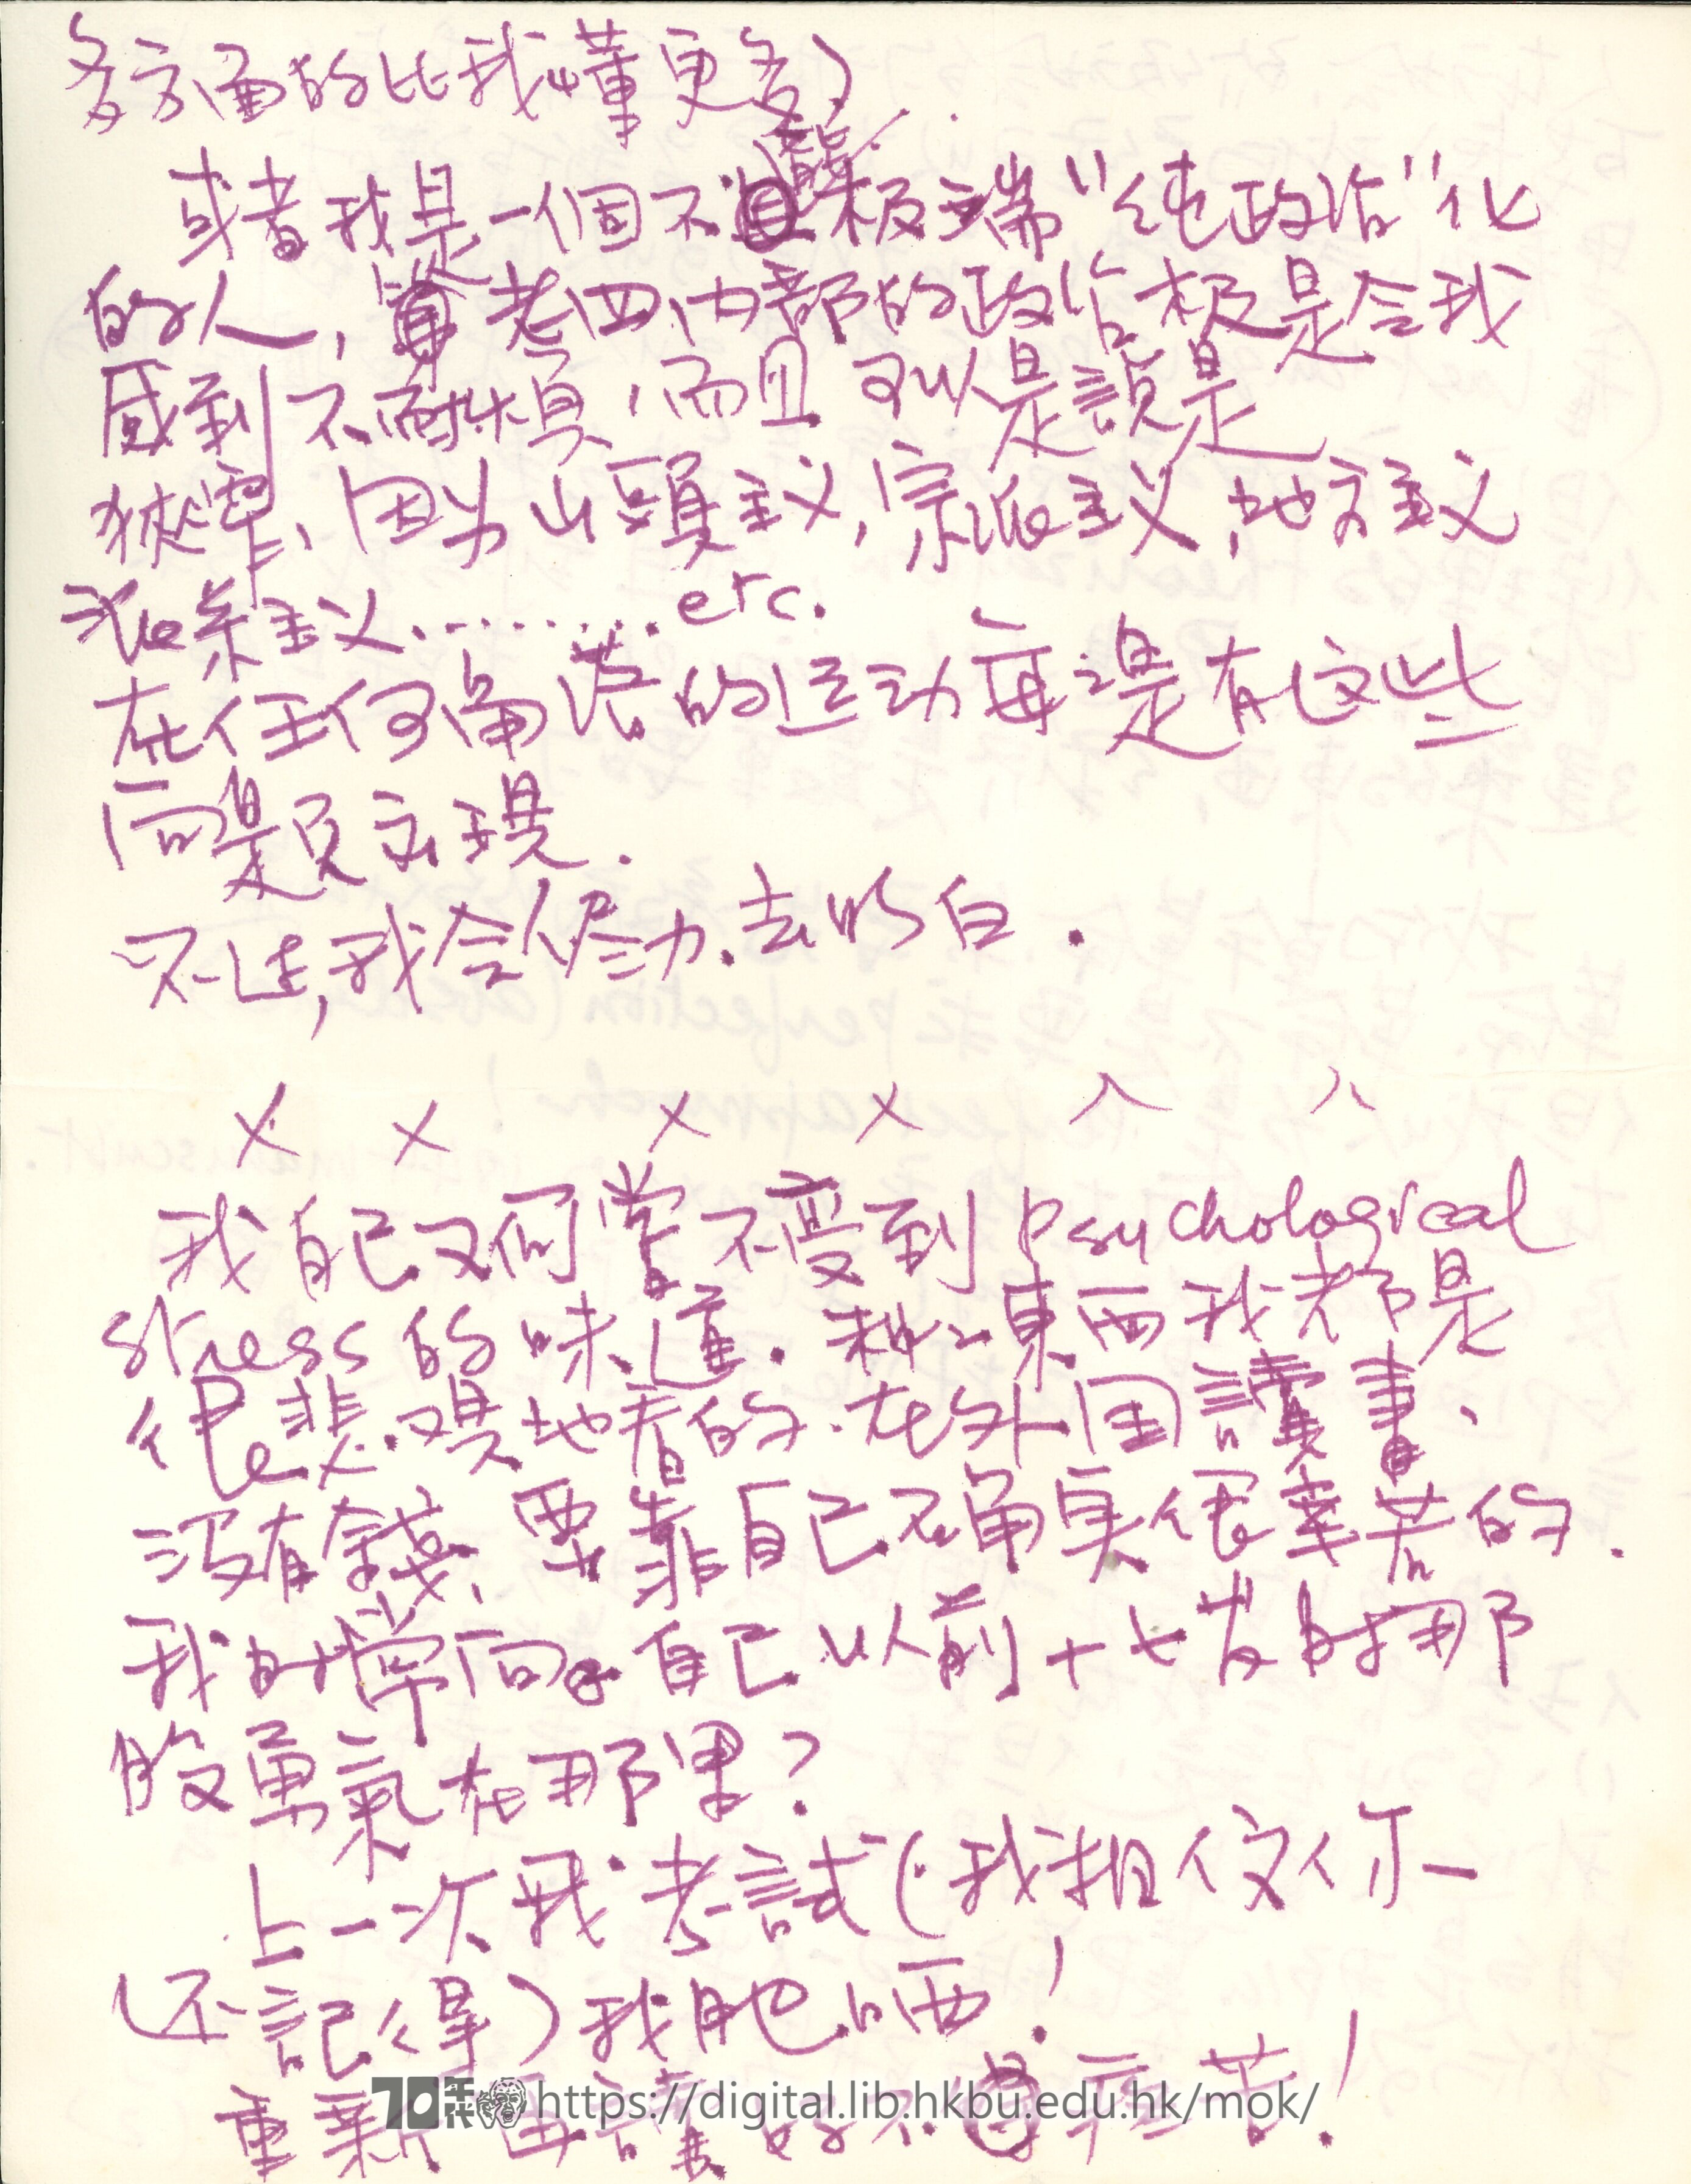   Letter from 吳家麟 吳家麟 